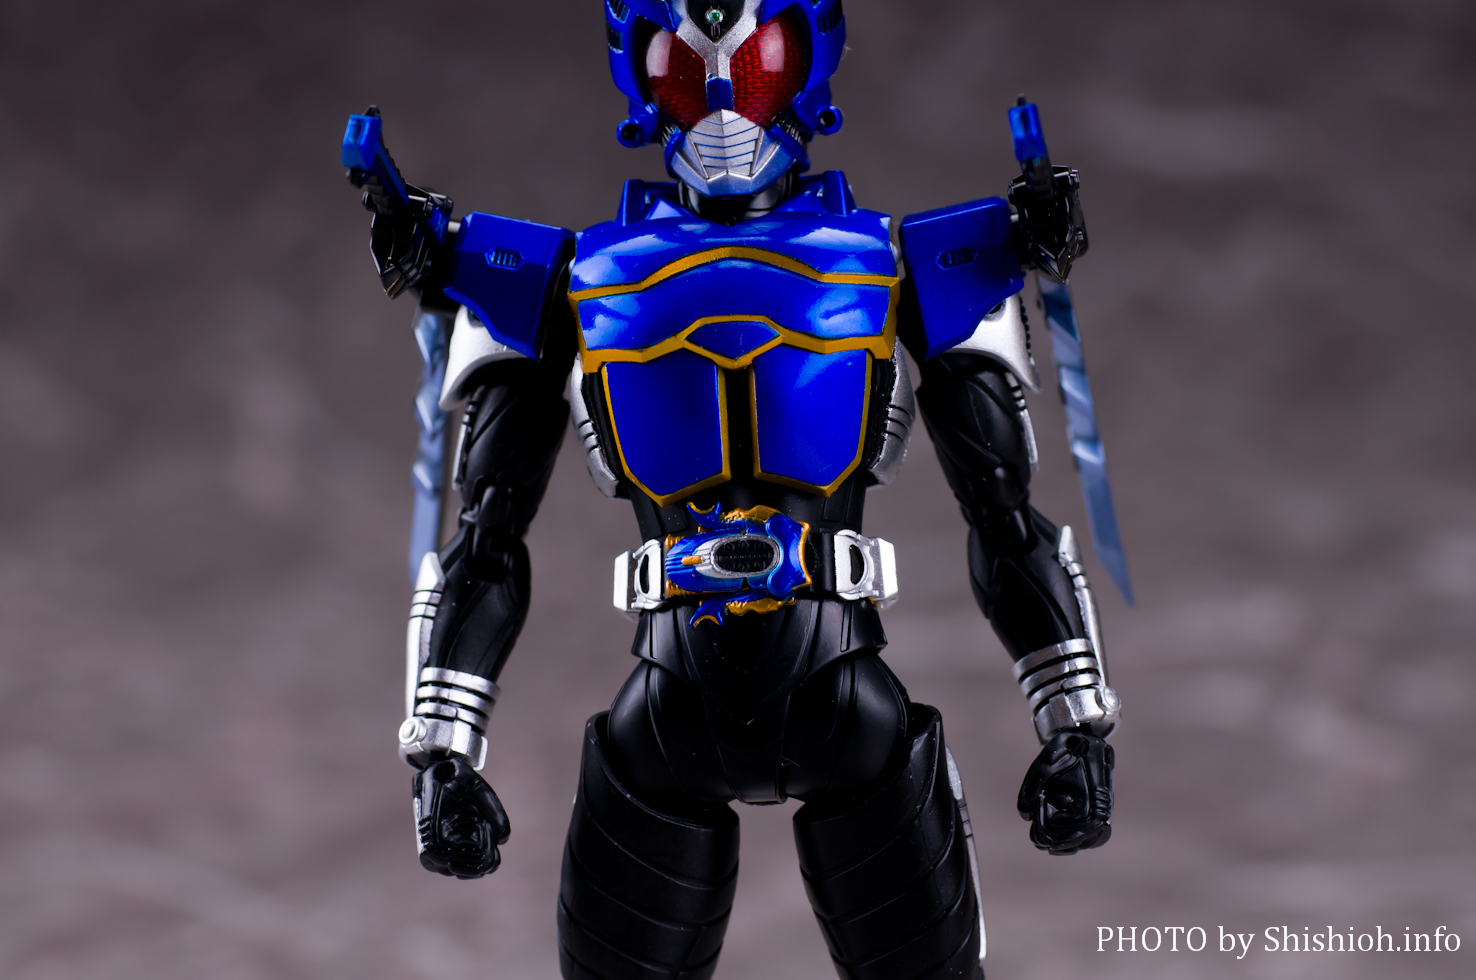 S.H.Figuarts（真骨彫製法）仮面ライダーガタック ライダーフォーム